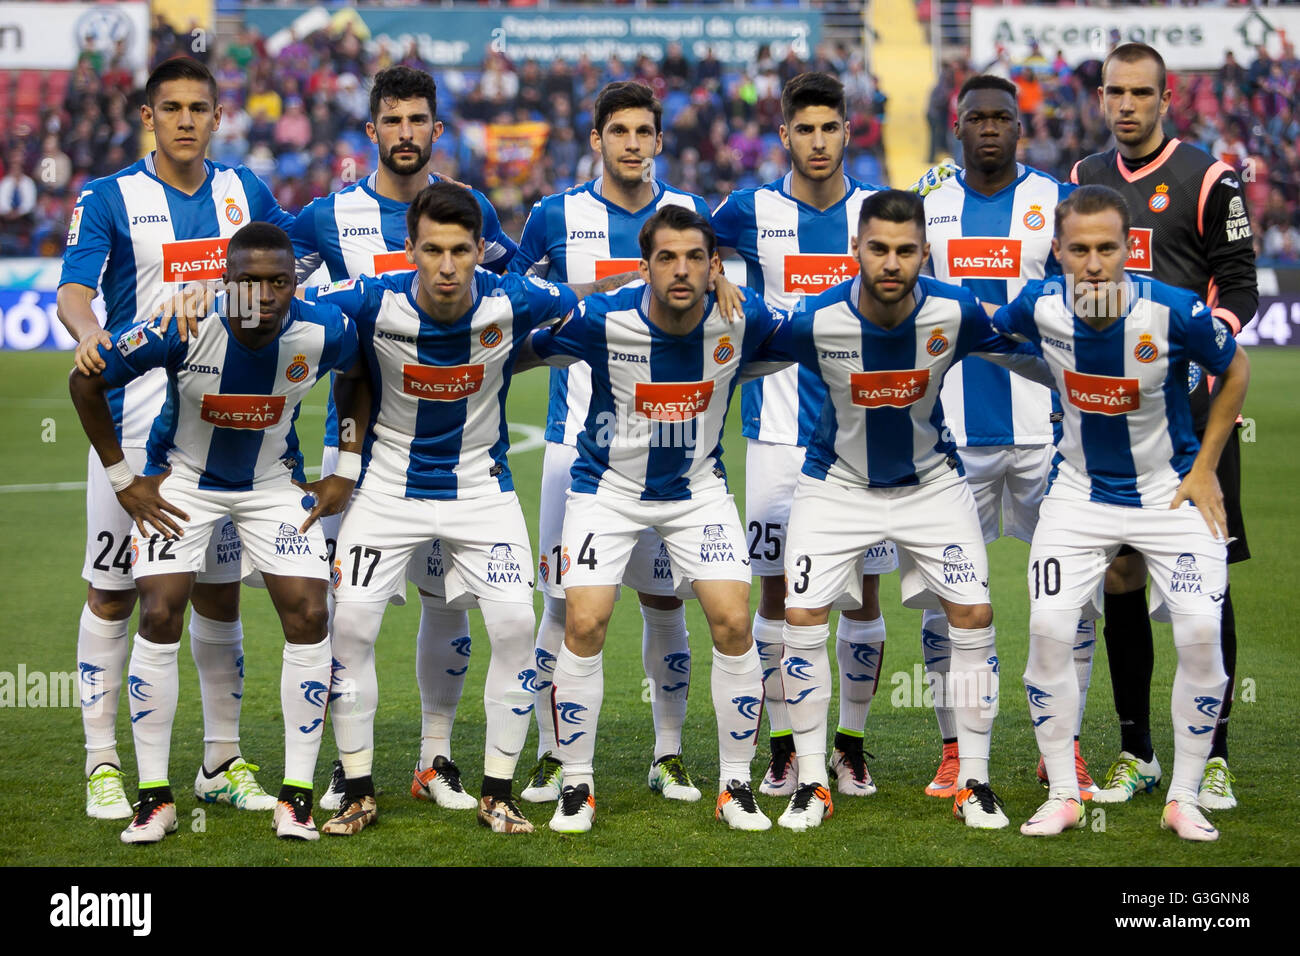 Valencia, Spain. 15th Apr, 2016. Espanyol team during La Liga match between Levante UD and RCD Espanyol at Ciutat de Valencia Stadium. La Liga match between Levante UD vs RCD Espanyol, with a final score 2-1. Rossi and Medjani scored for Levante and Hernan Perez scored for RCD Espanyol. © Jose Miguel Fernandez de Velasco/Pacific Press/Alamy Live News Stock Photo